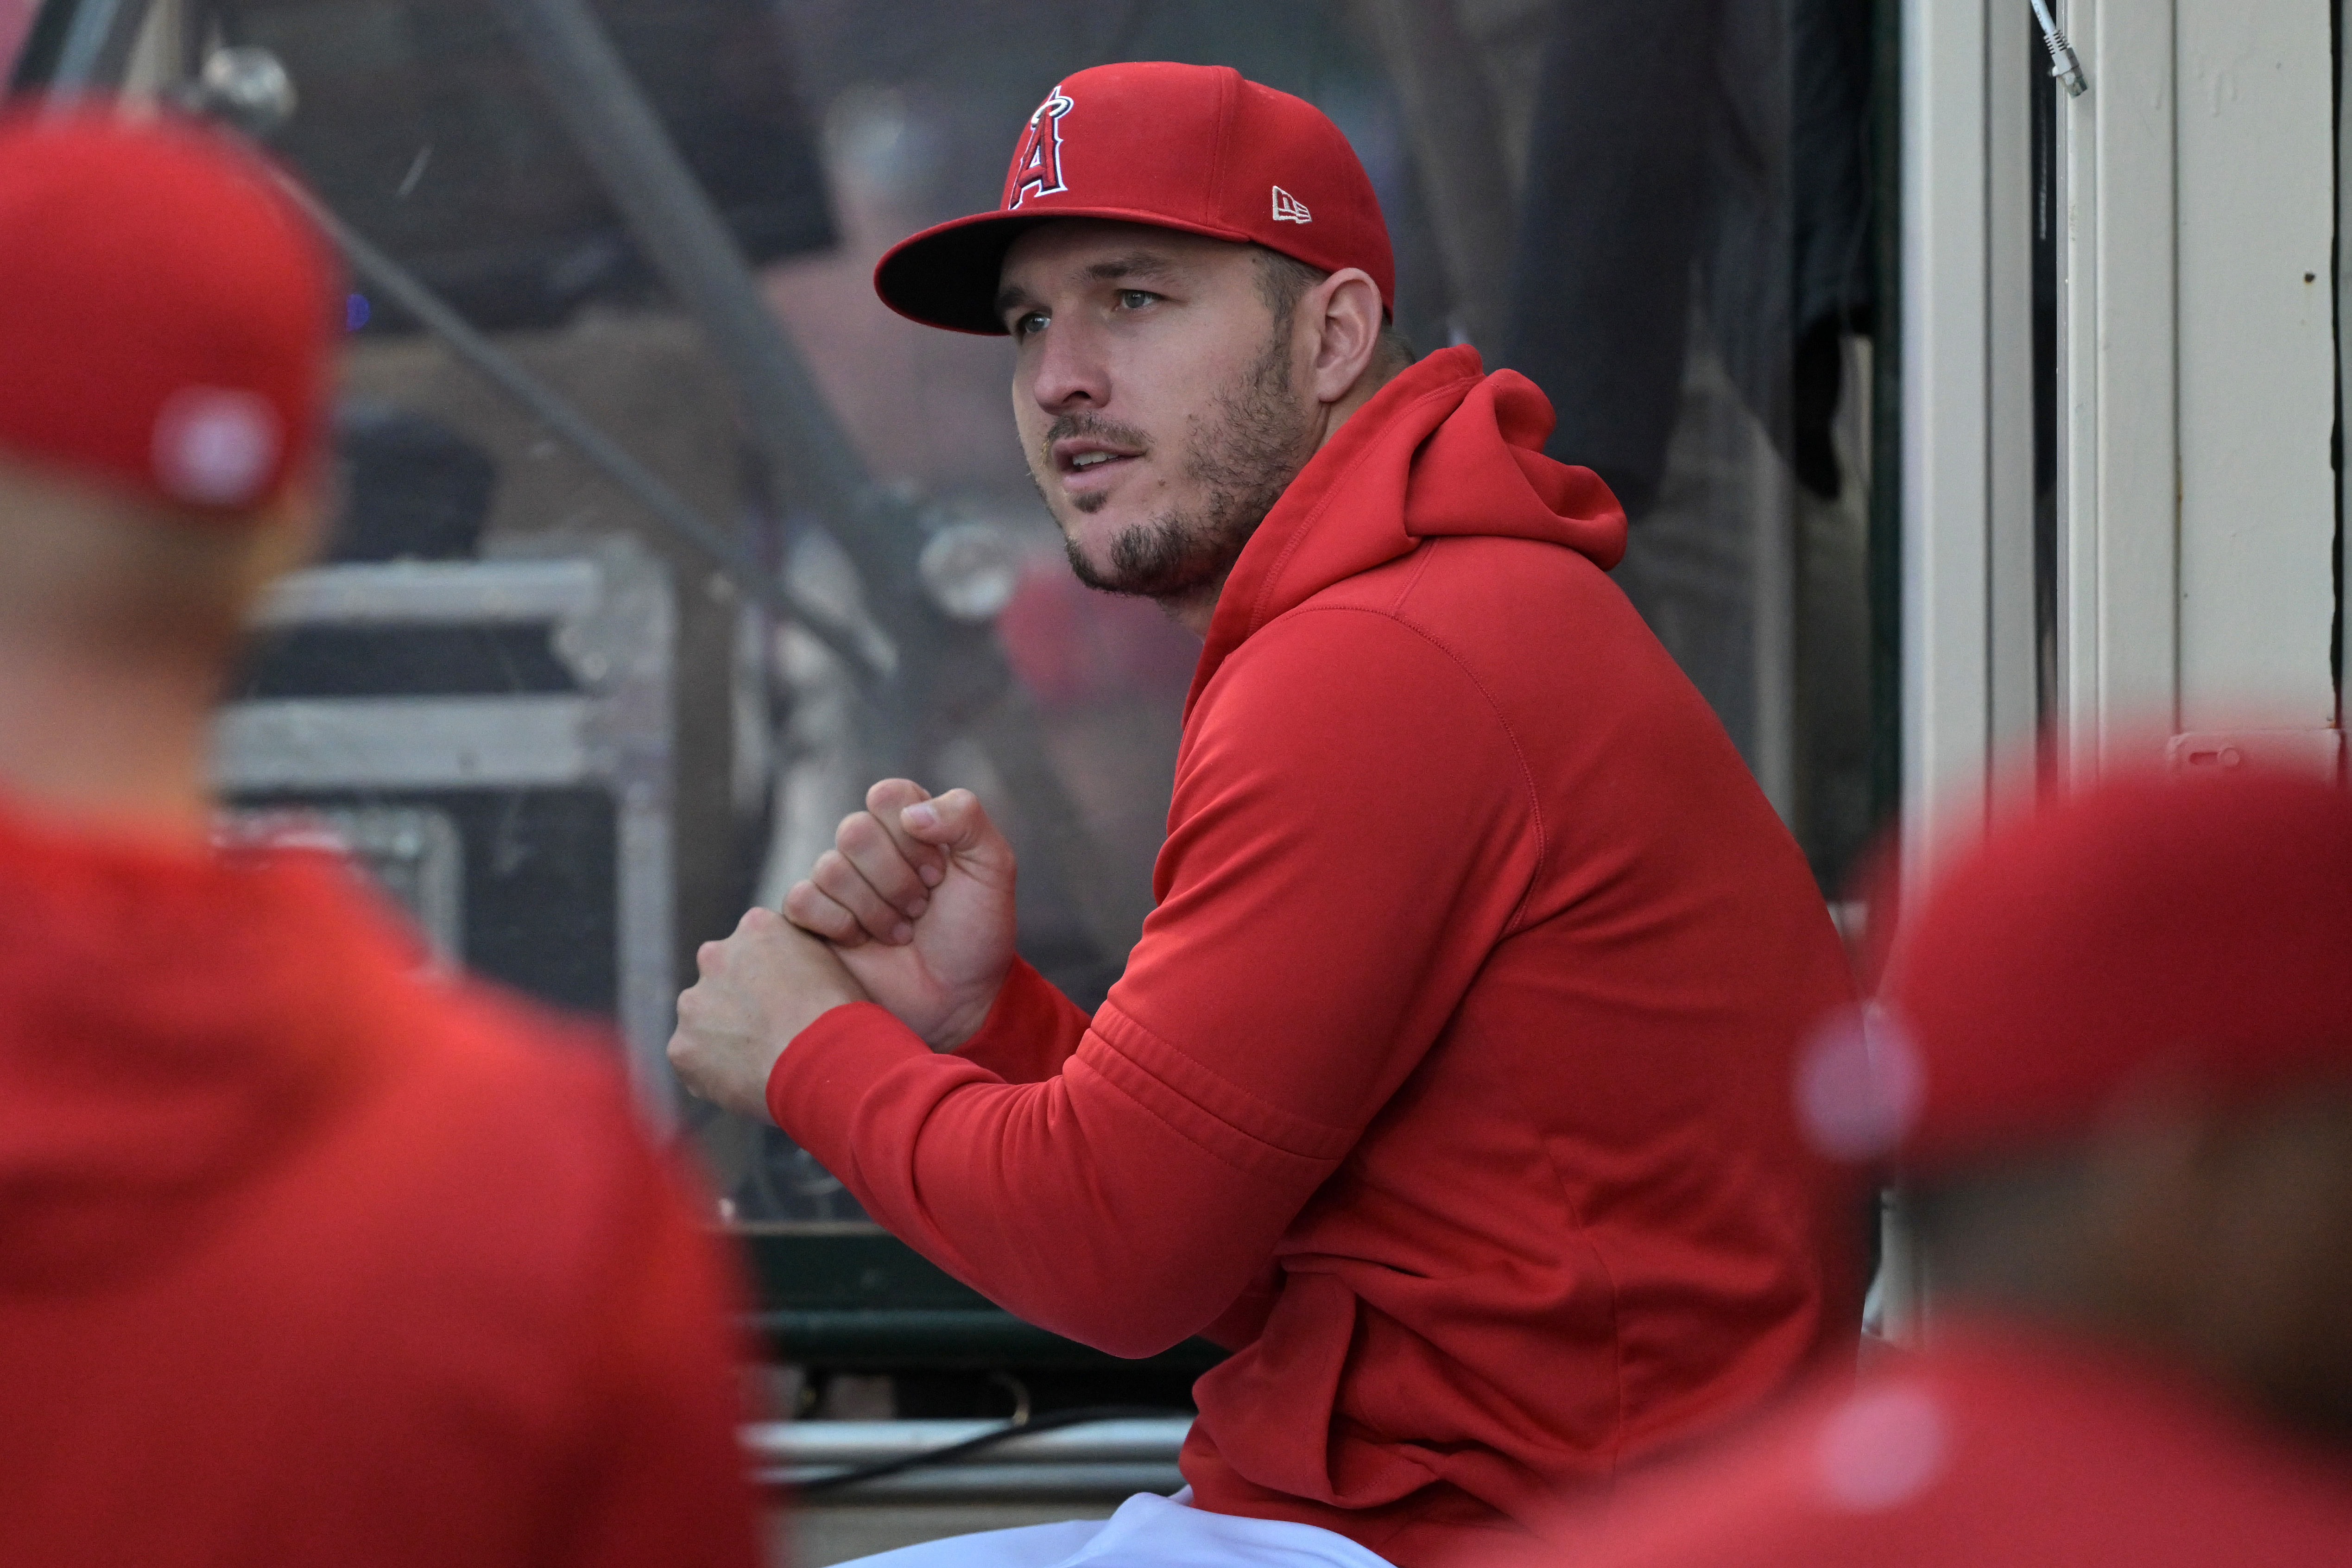 The Angels might trade Mike Trout at some point